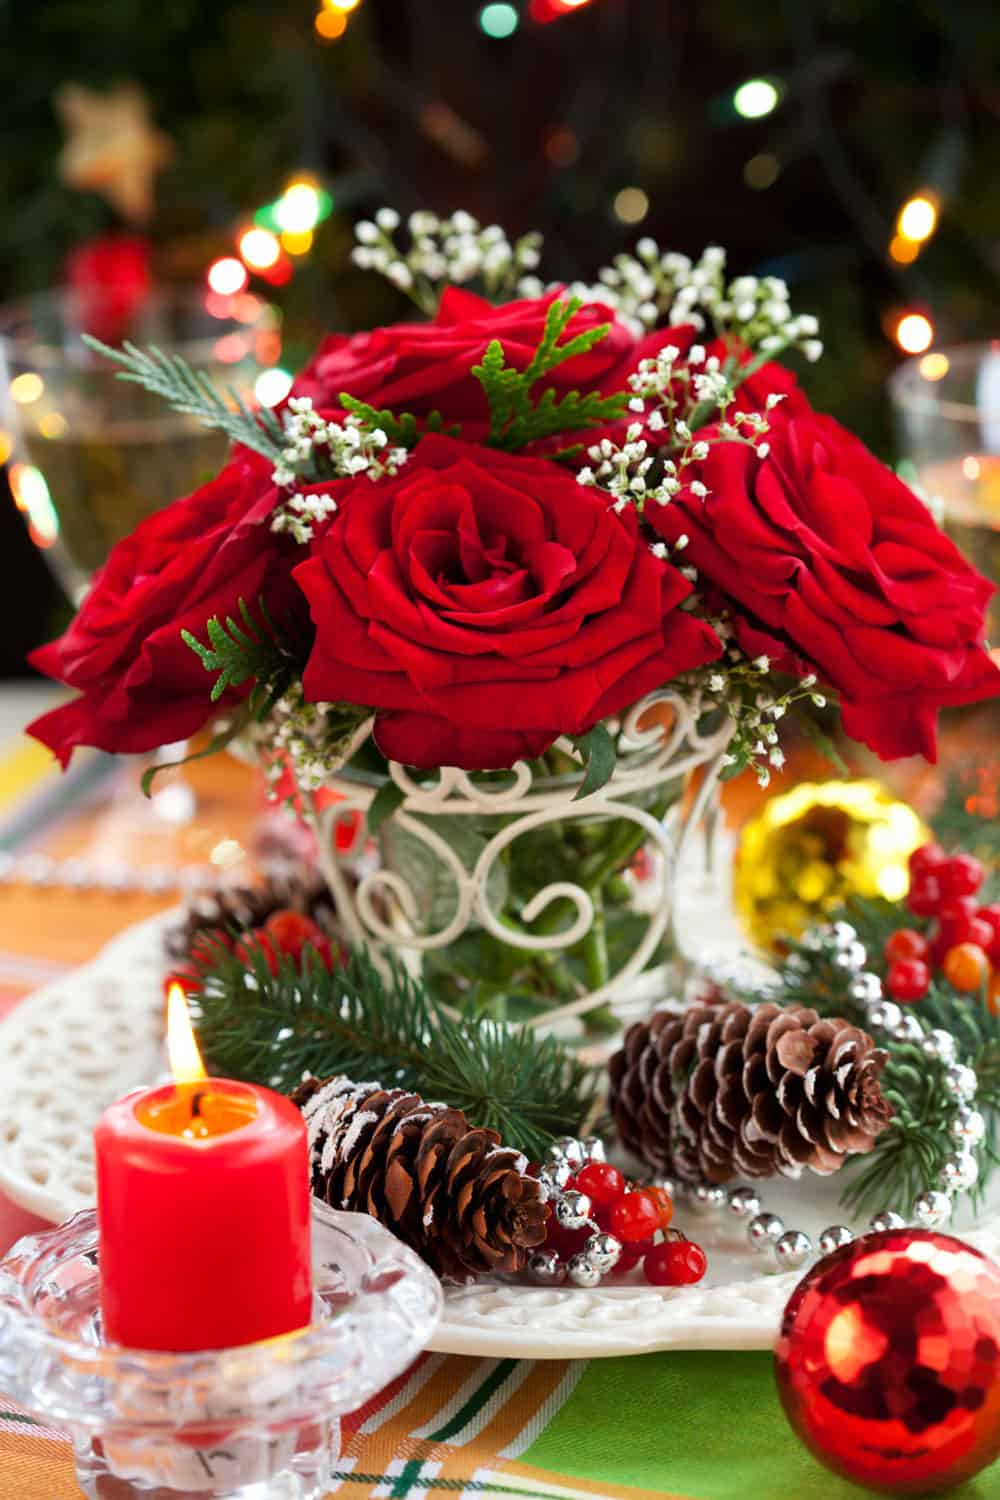 Christmas arrangement of red roses,fir, holly and pine cones